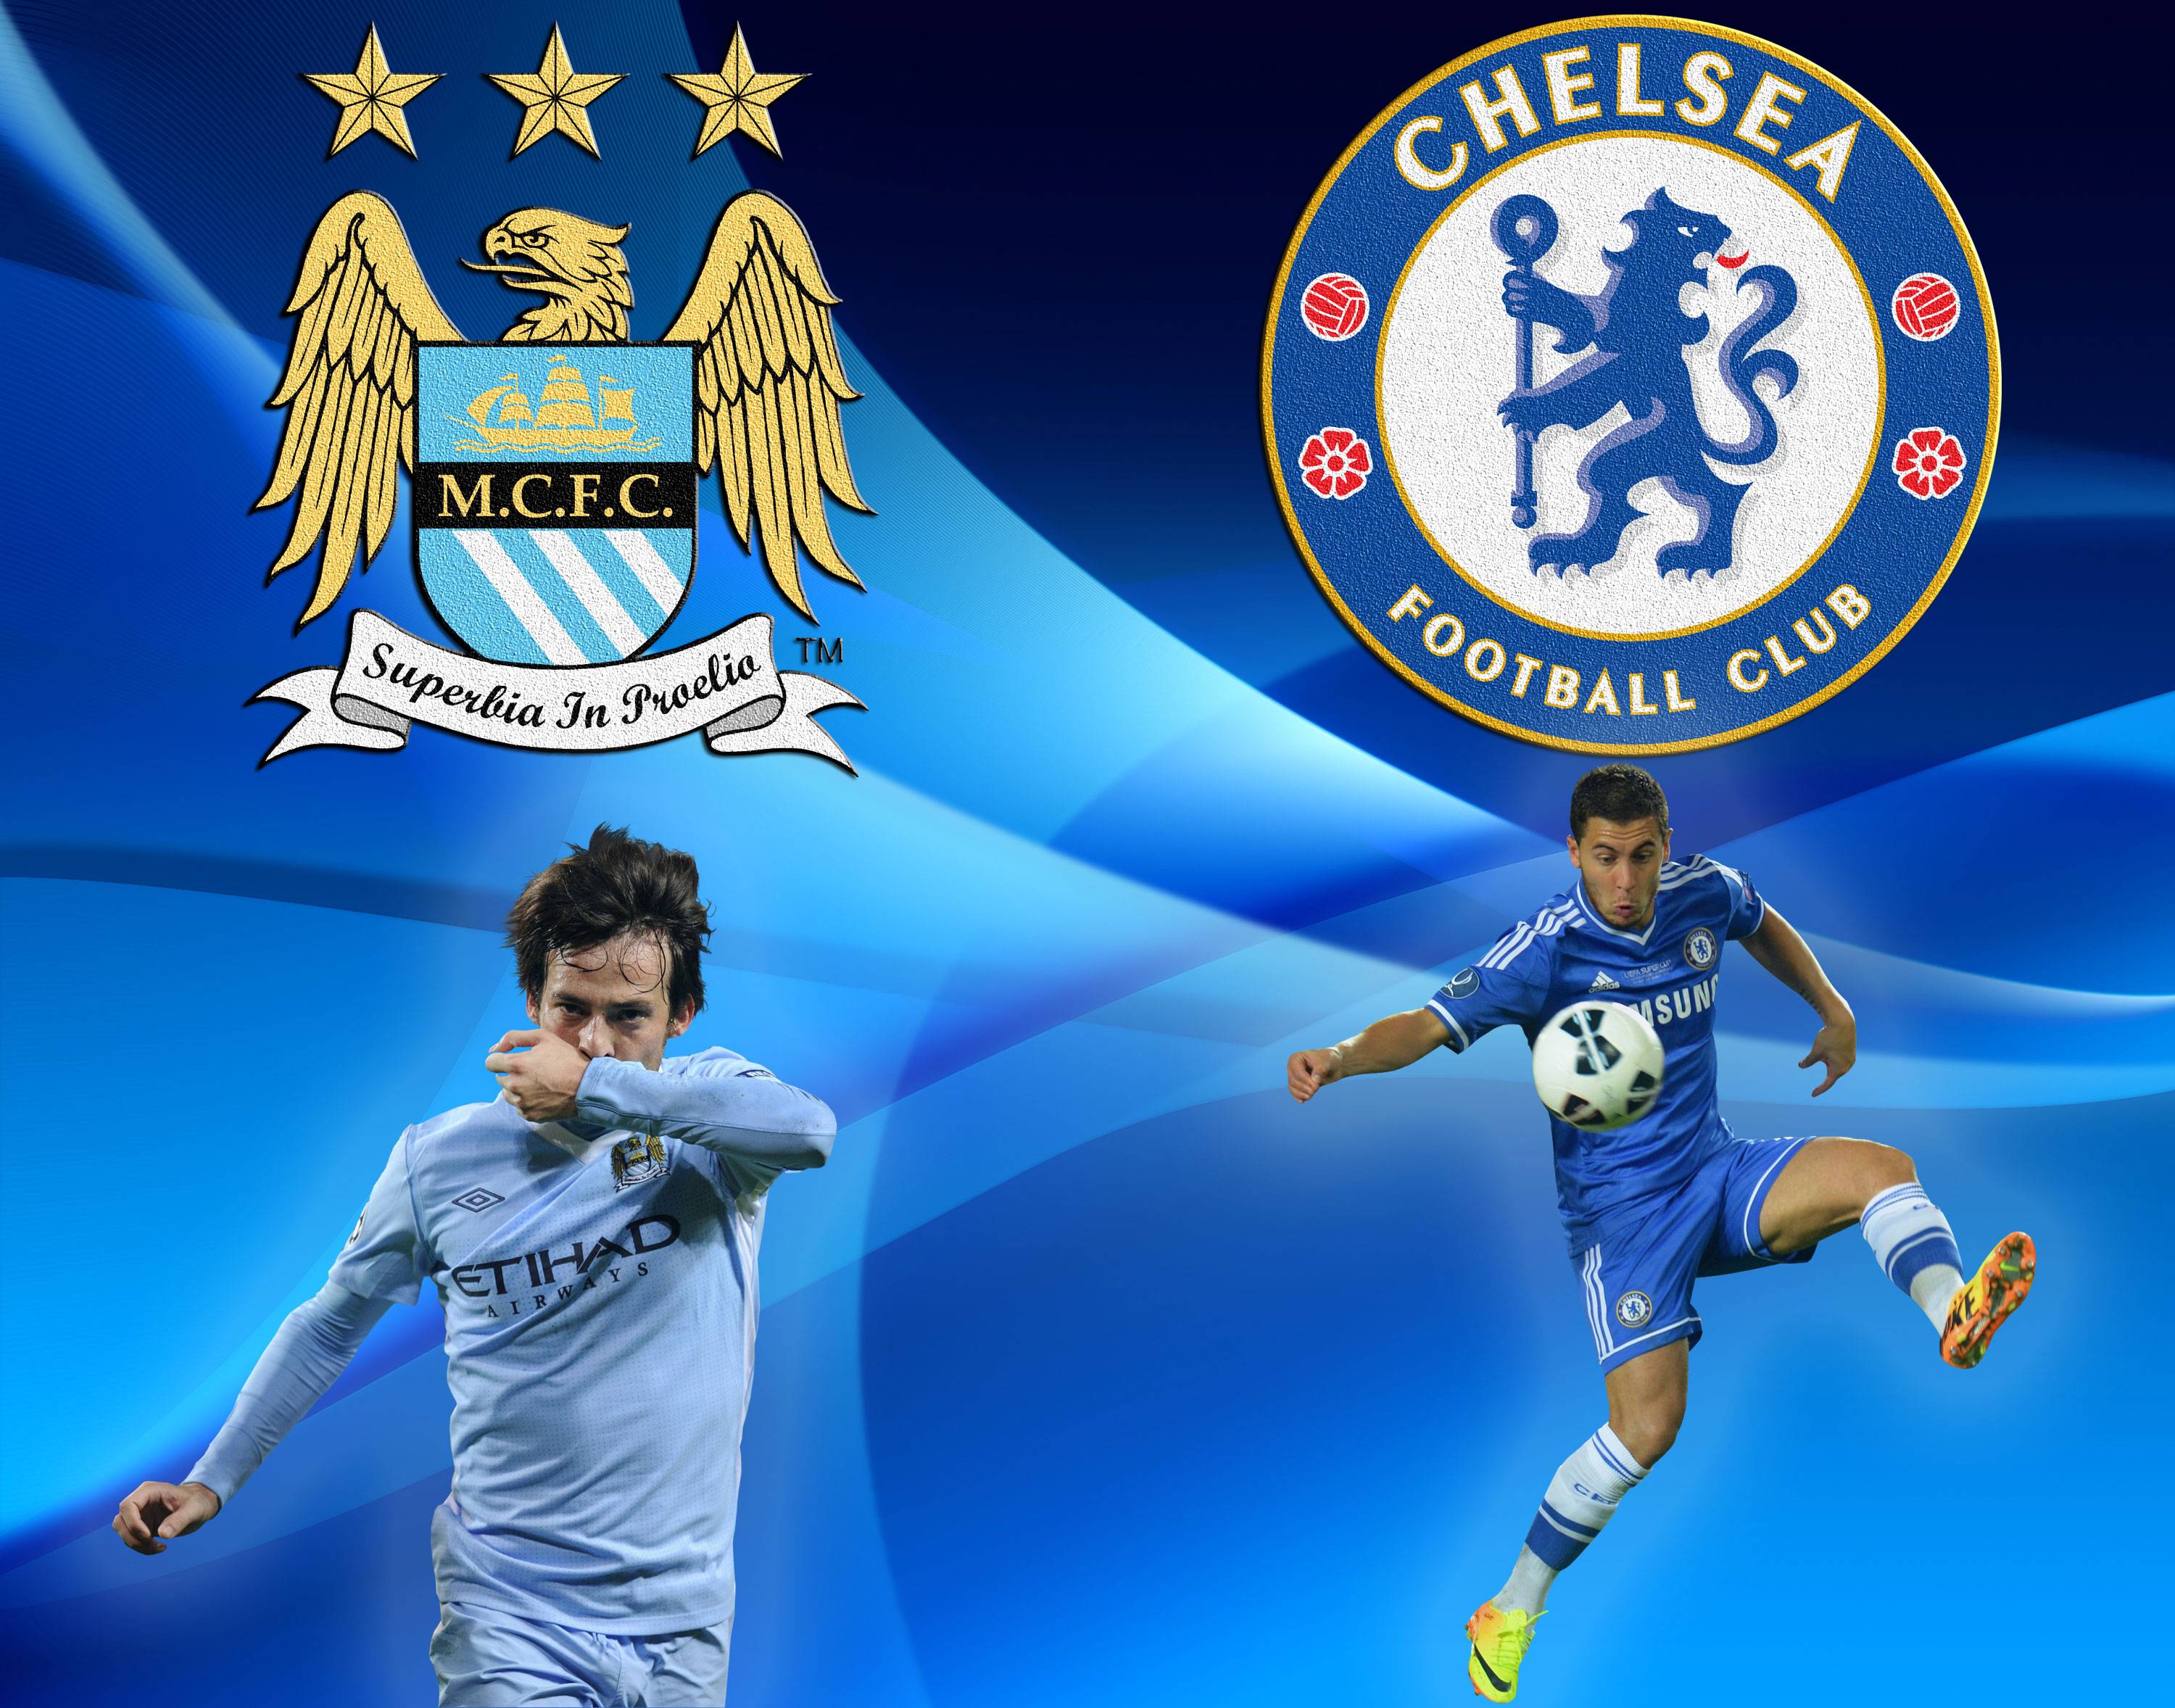 Manchester City vs Chelsea FC 2014 Wallpaper Wide or HD. Sports